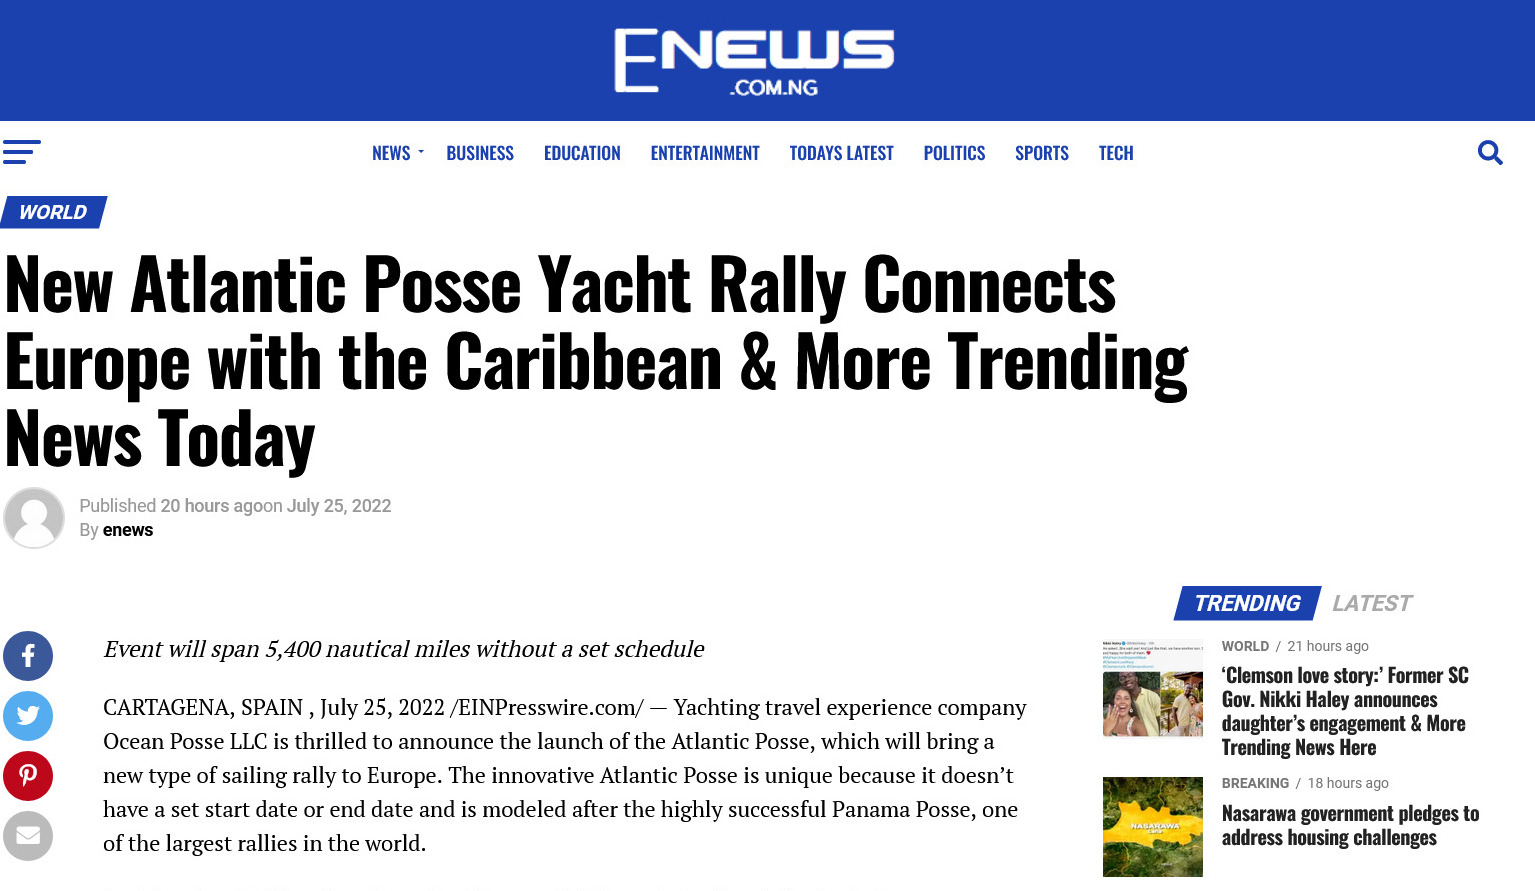 https://enews.com.ng/2022/07/new-atlantic-posse-yacht-rally-connects-europe-with-the-caribbean-more-trending-news-today/